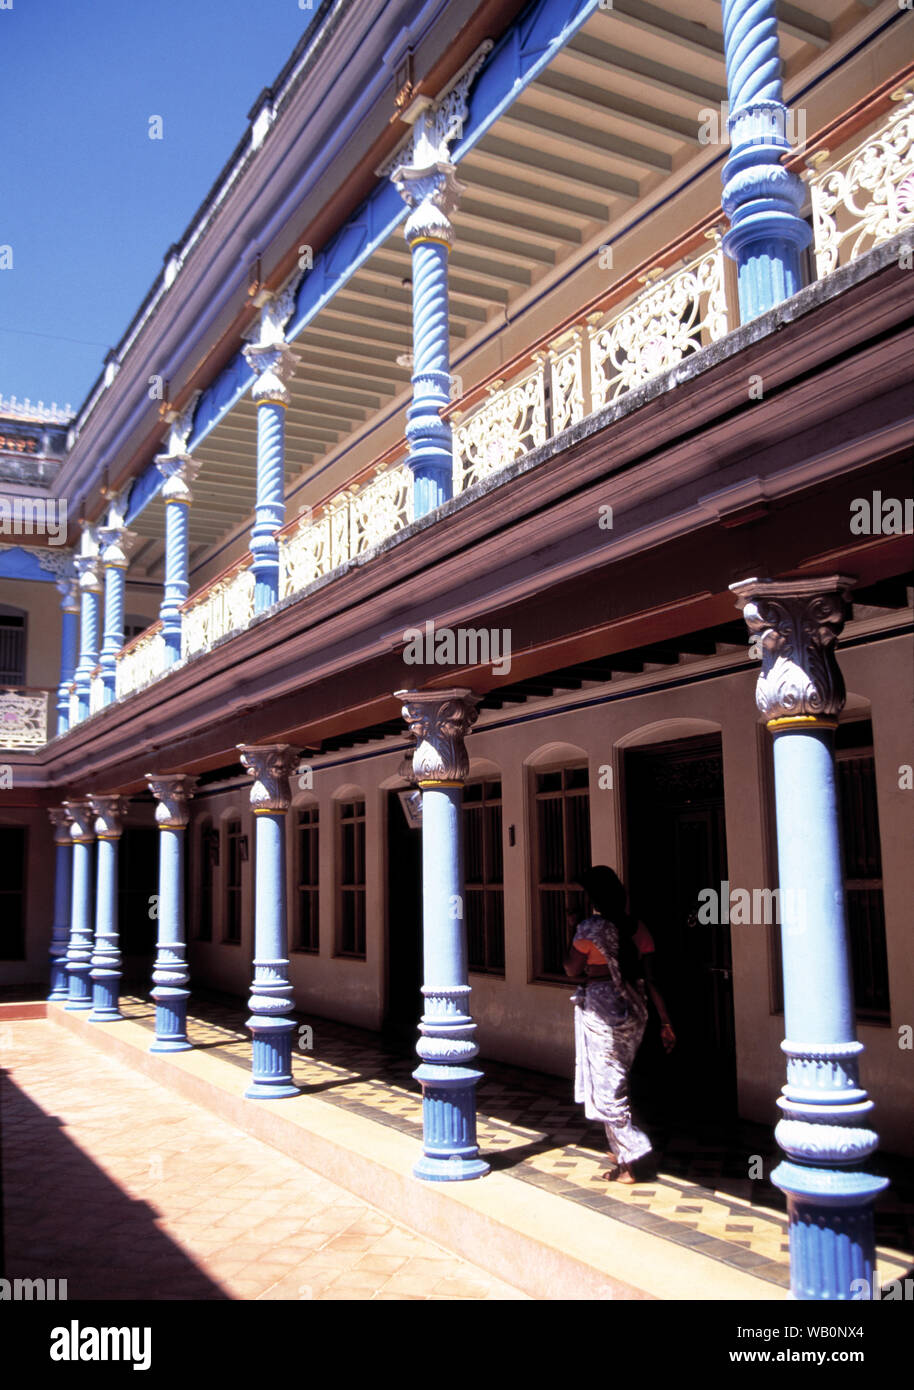 asia, asian, india, indian, building, palace, colourful Stock Photo